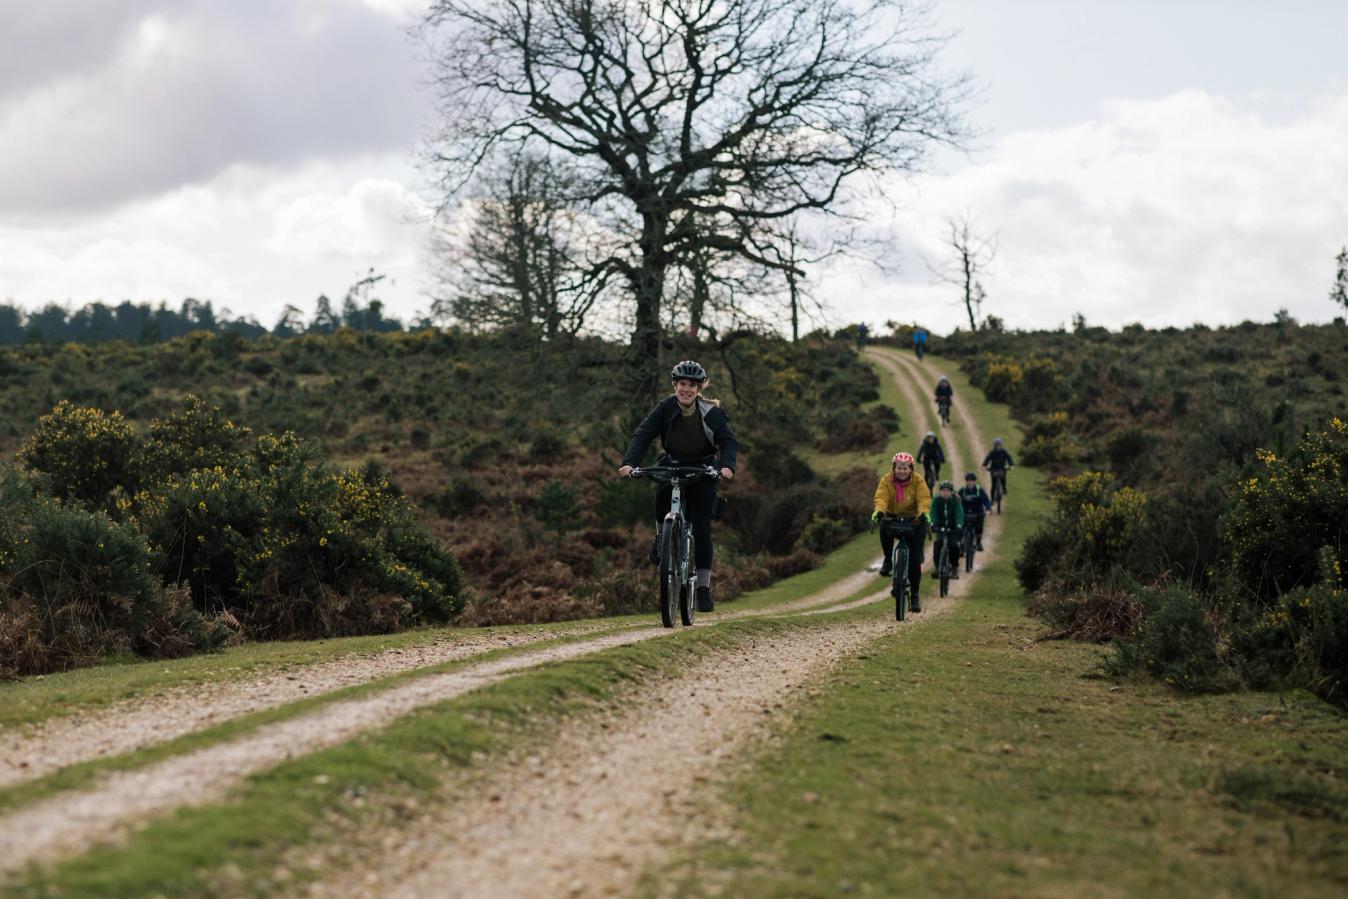 The NFORC ride on gravel trails in the New Forest, Hampshire